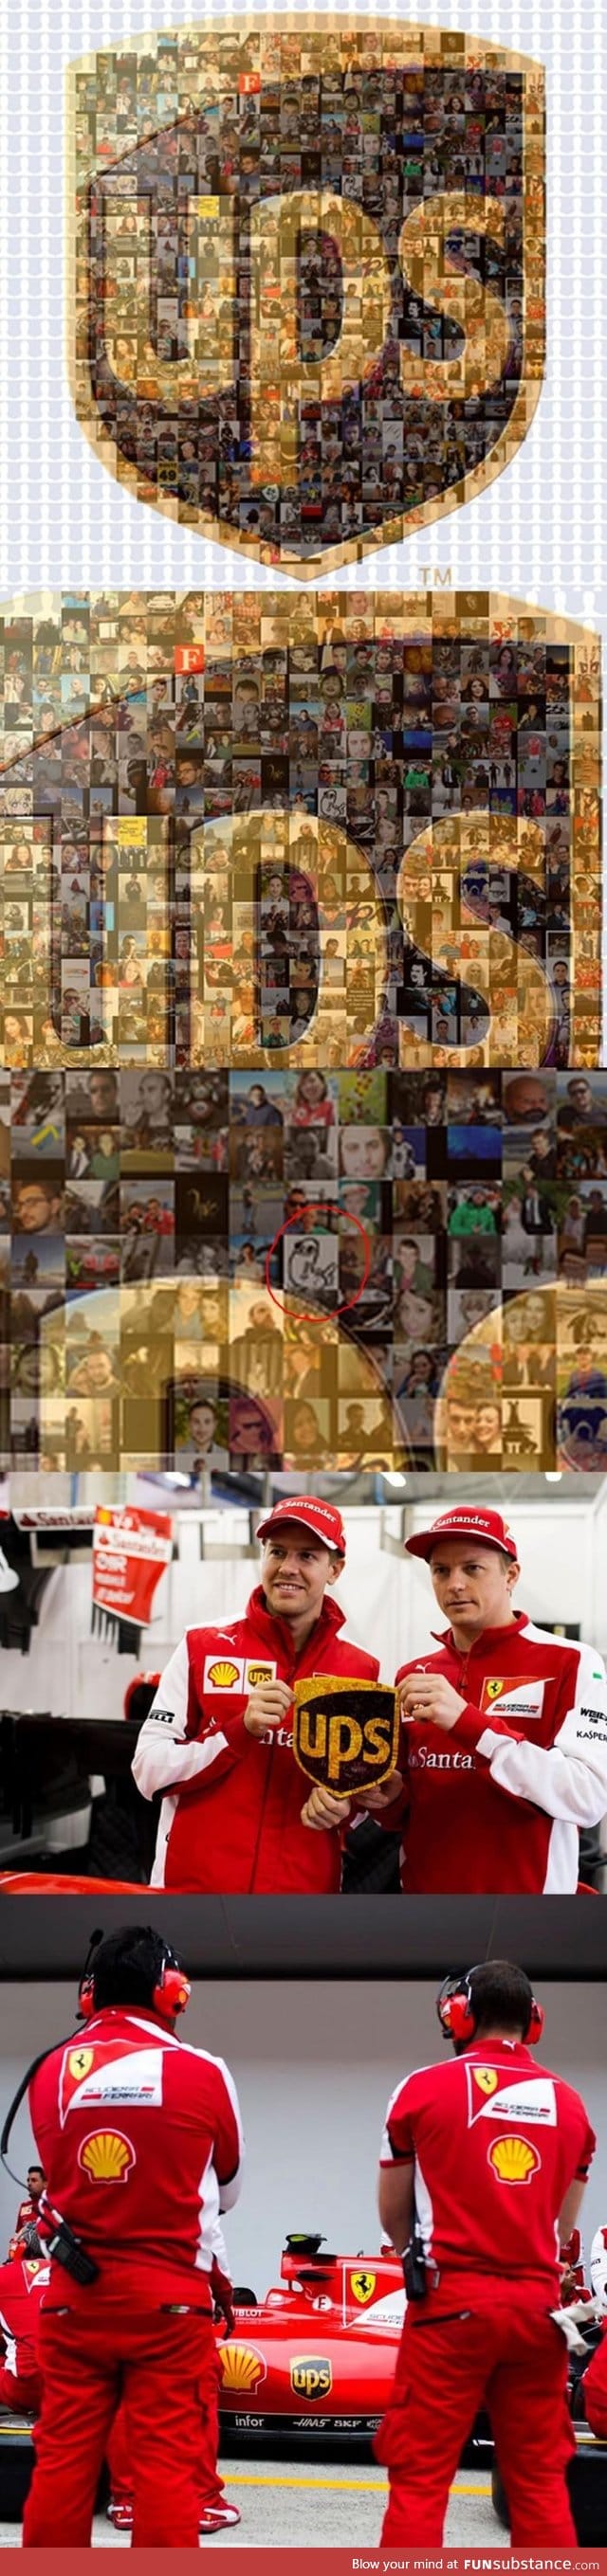 UPS shield. The mosaic that was built from images fans sent. To be posted on F1 Ferrari